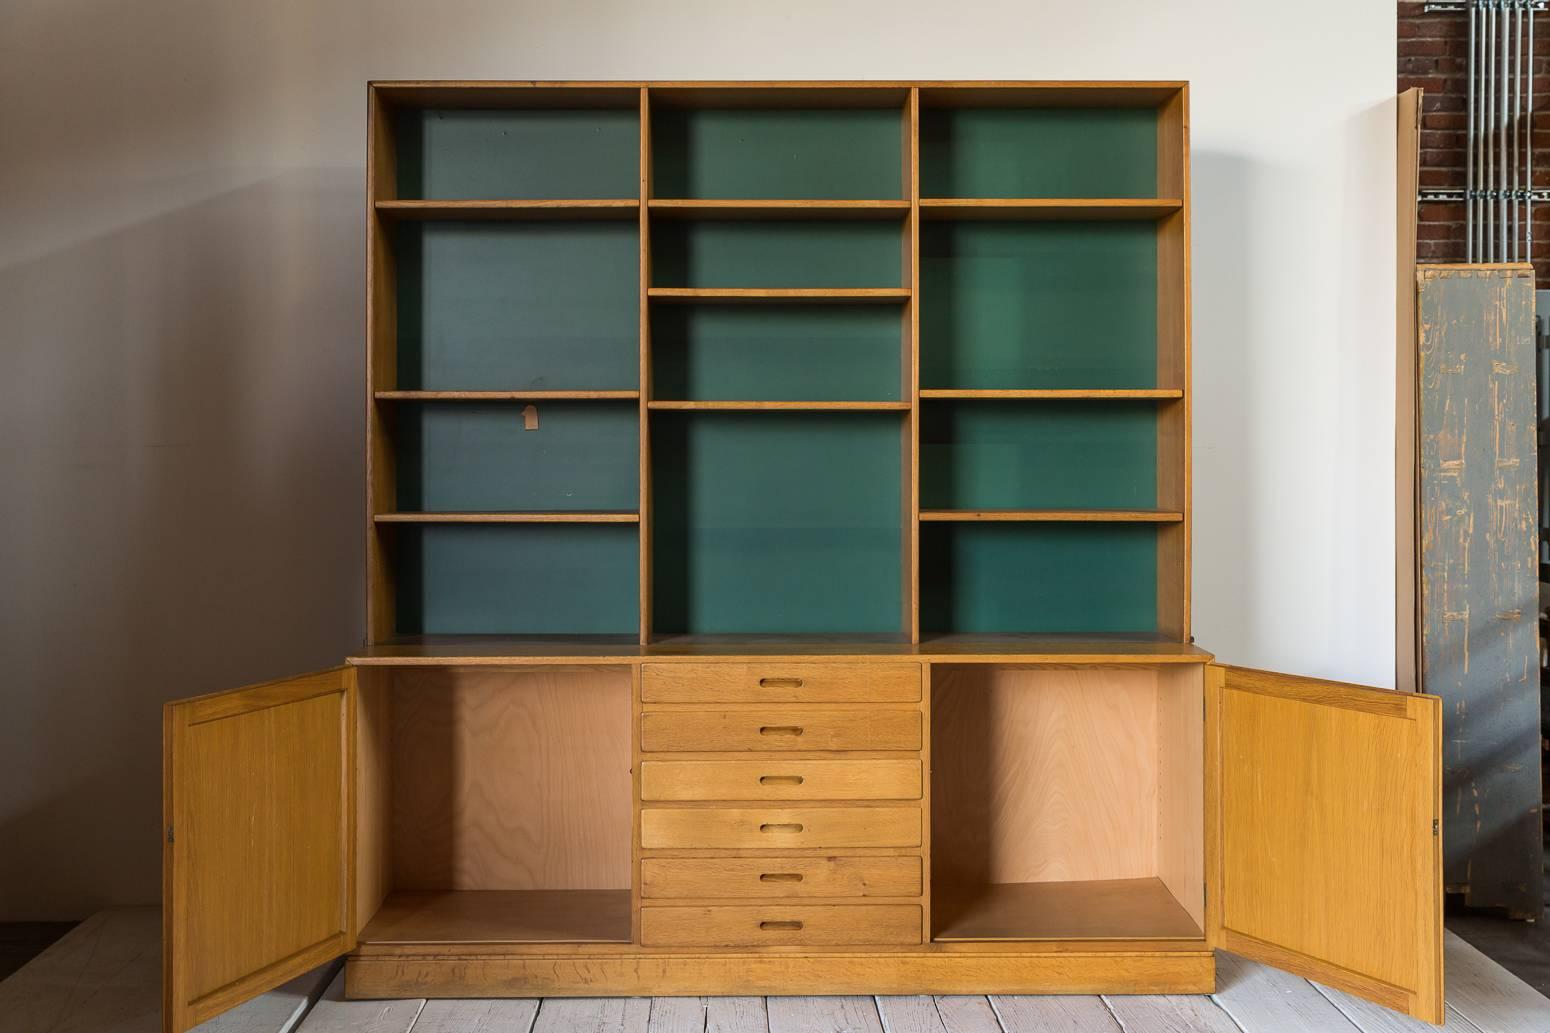 Two-piece midcentury oak cabinet with green back wall. Top piece has adjustable shelves, bottom portion includes a mix of drawers and two doors. Recessed pull details.